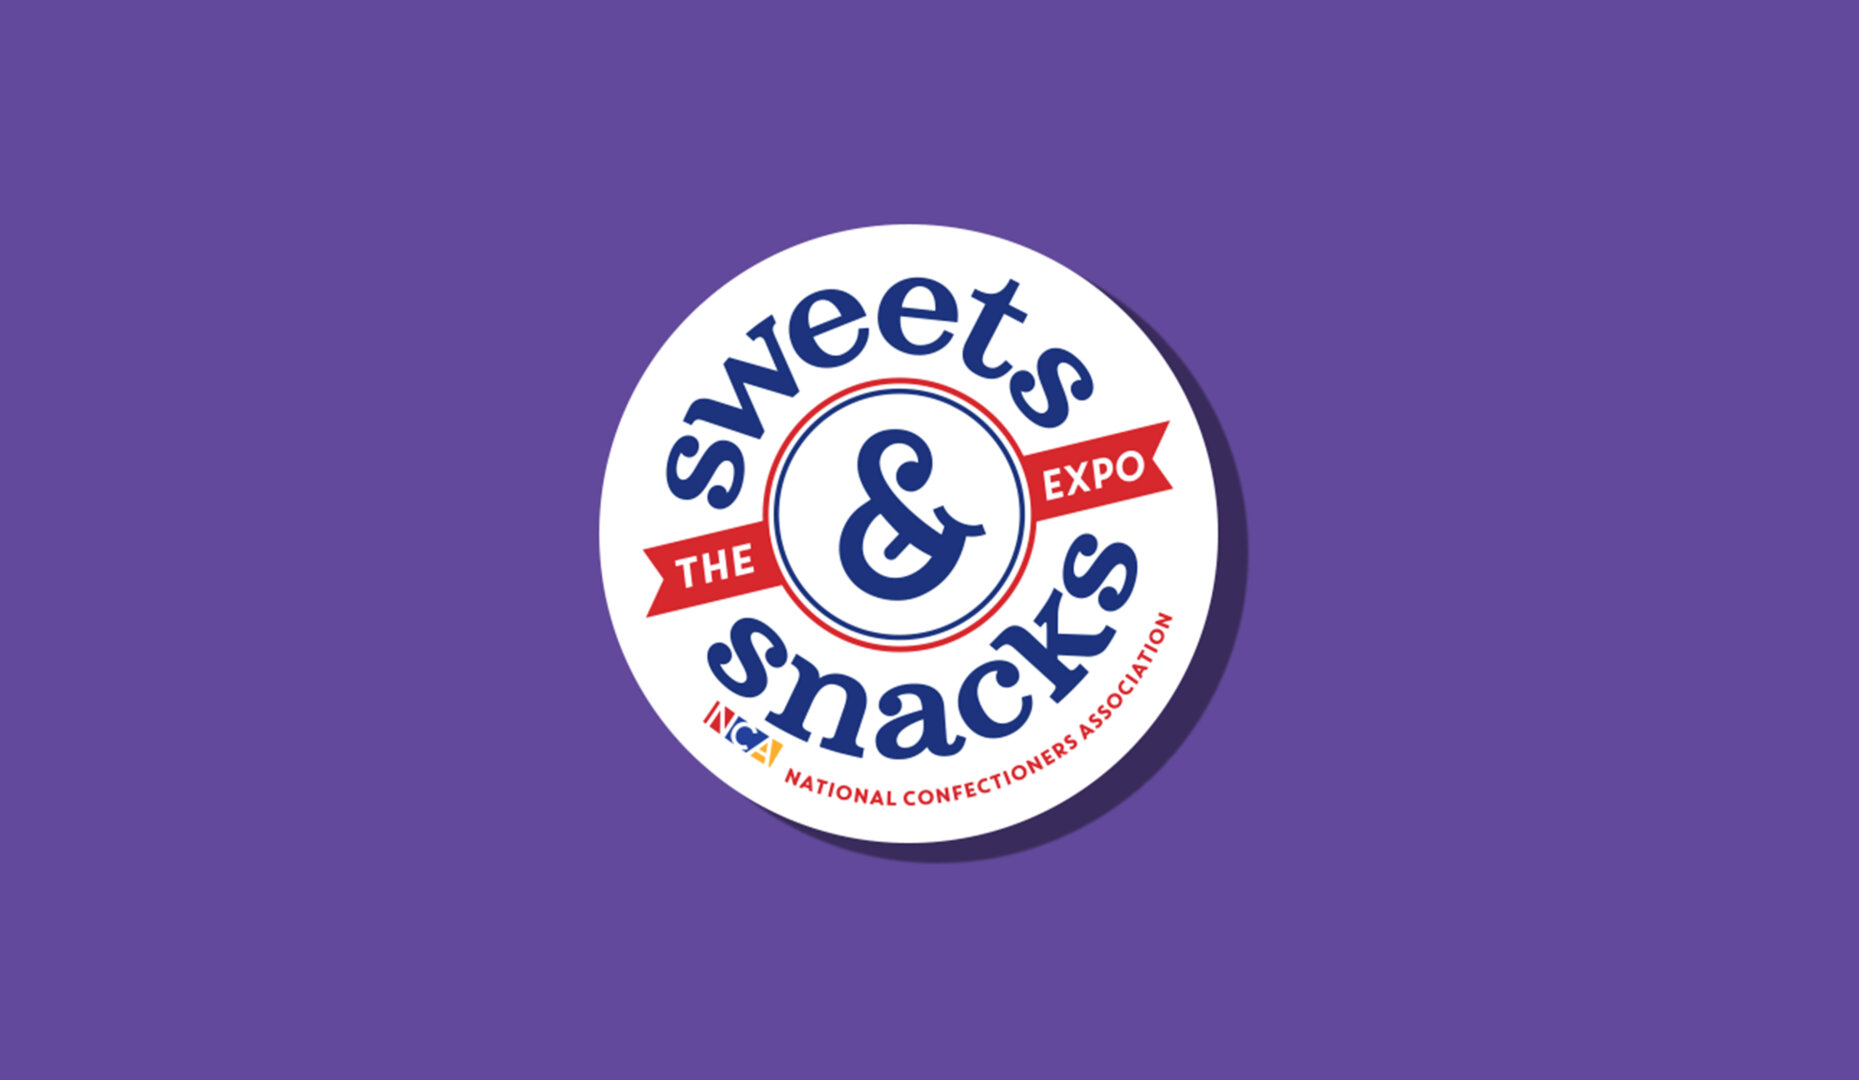 Sweets and Snacks Expo Logo on a purple background